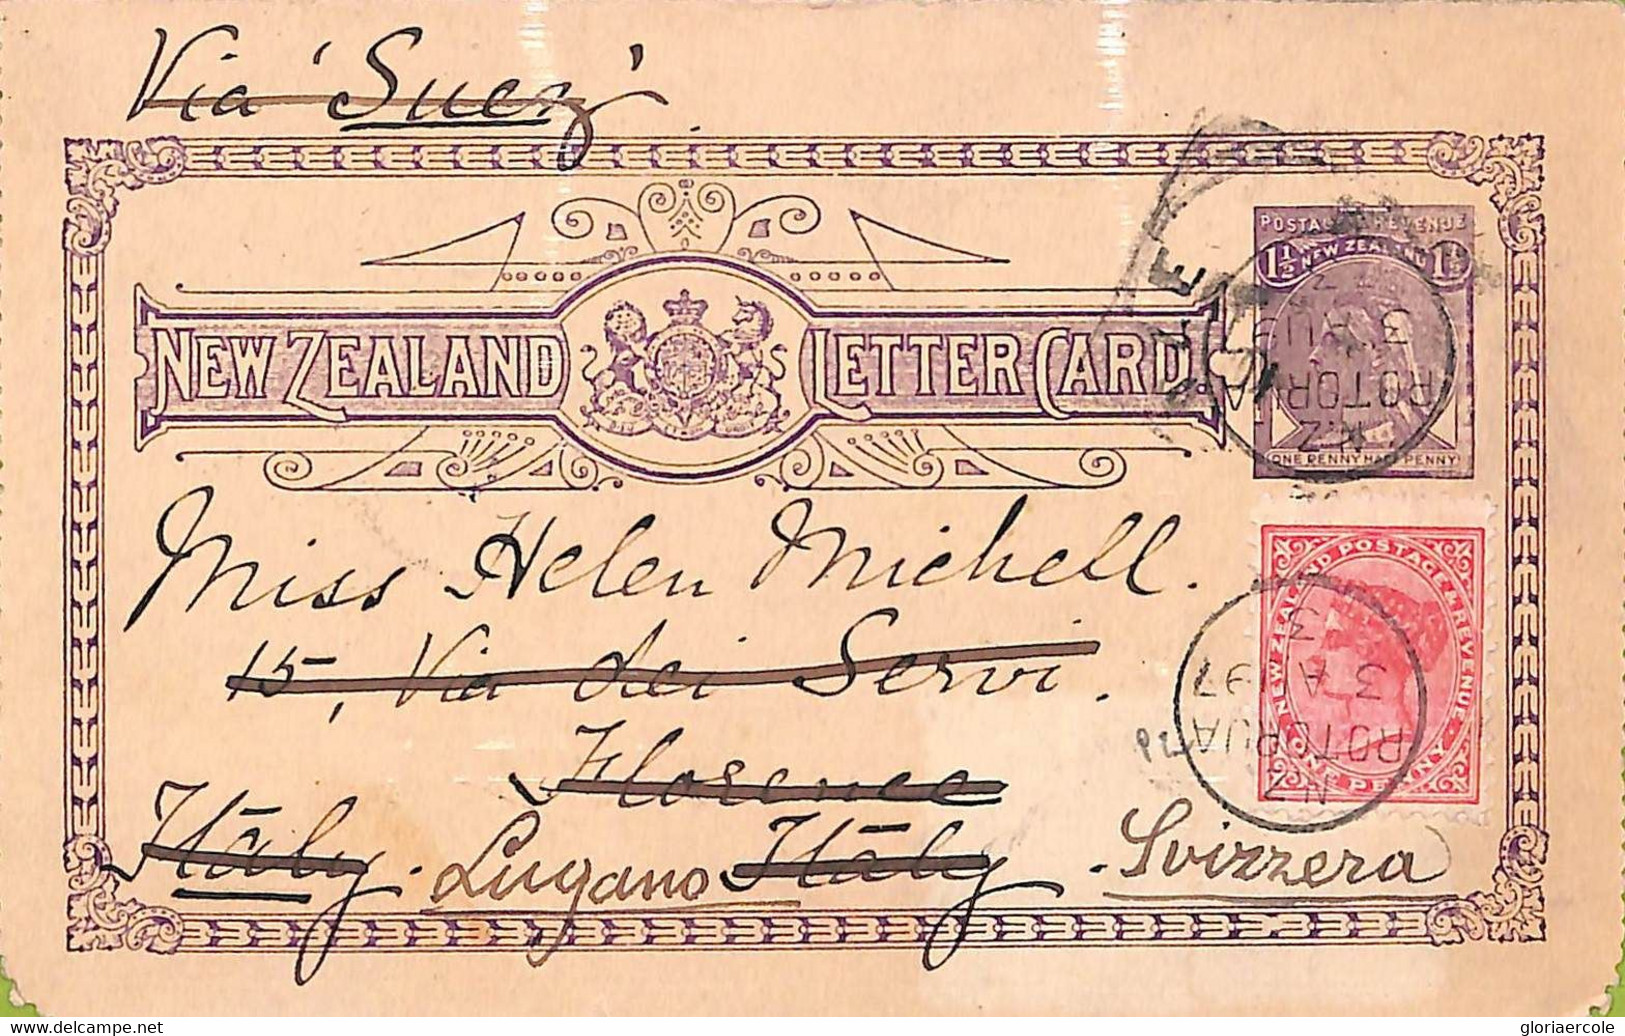 Ac6686 - NEW ZEALAND - POSTAL HISTORY - STATIONERY Letter Card To ITALY 1897 - Briefe U. Dokumente